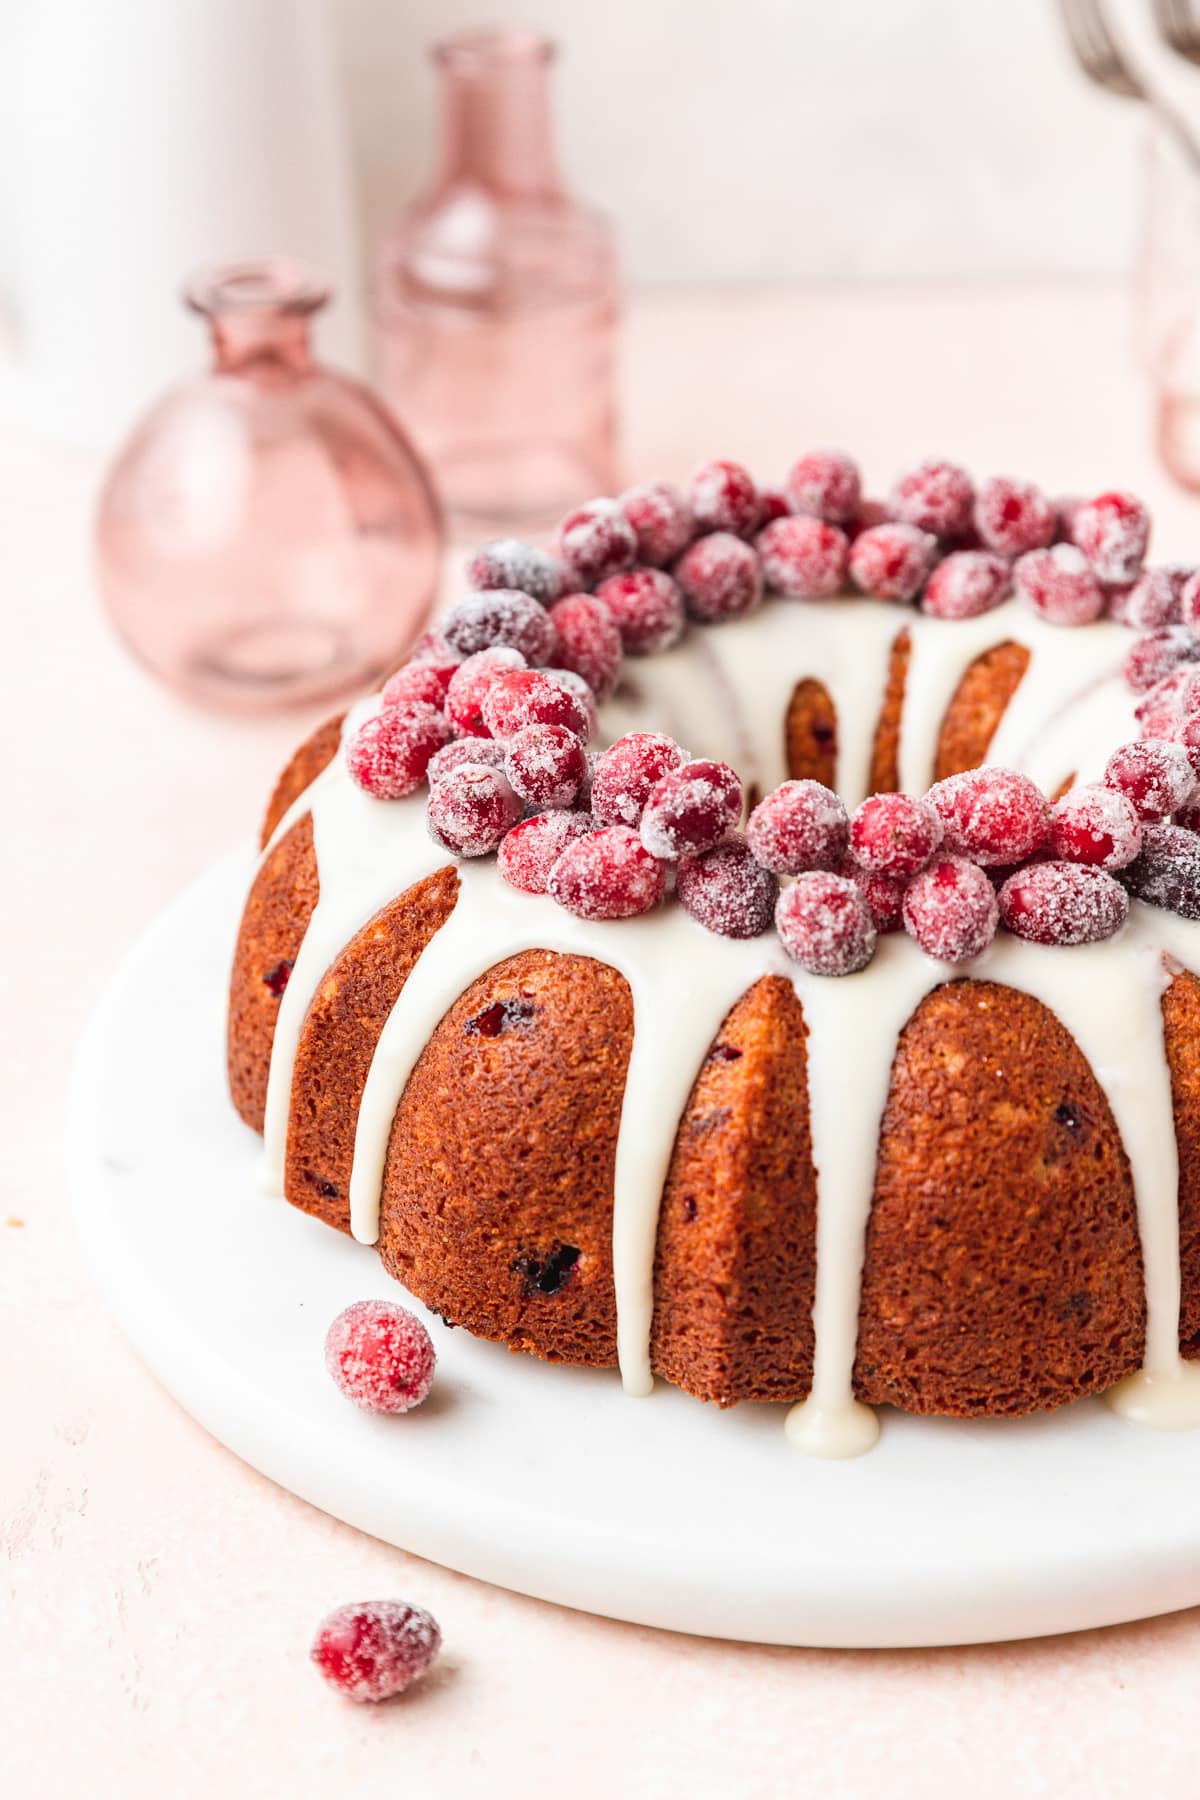 cranberry bundt cake topped with candied cranberries.